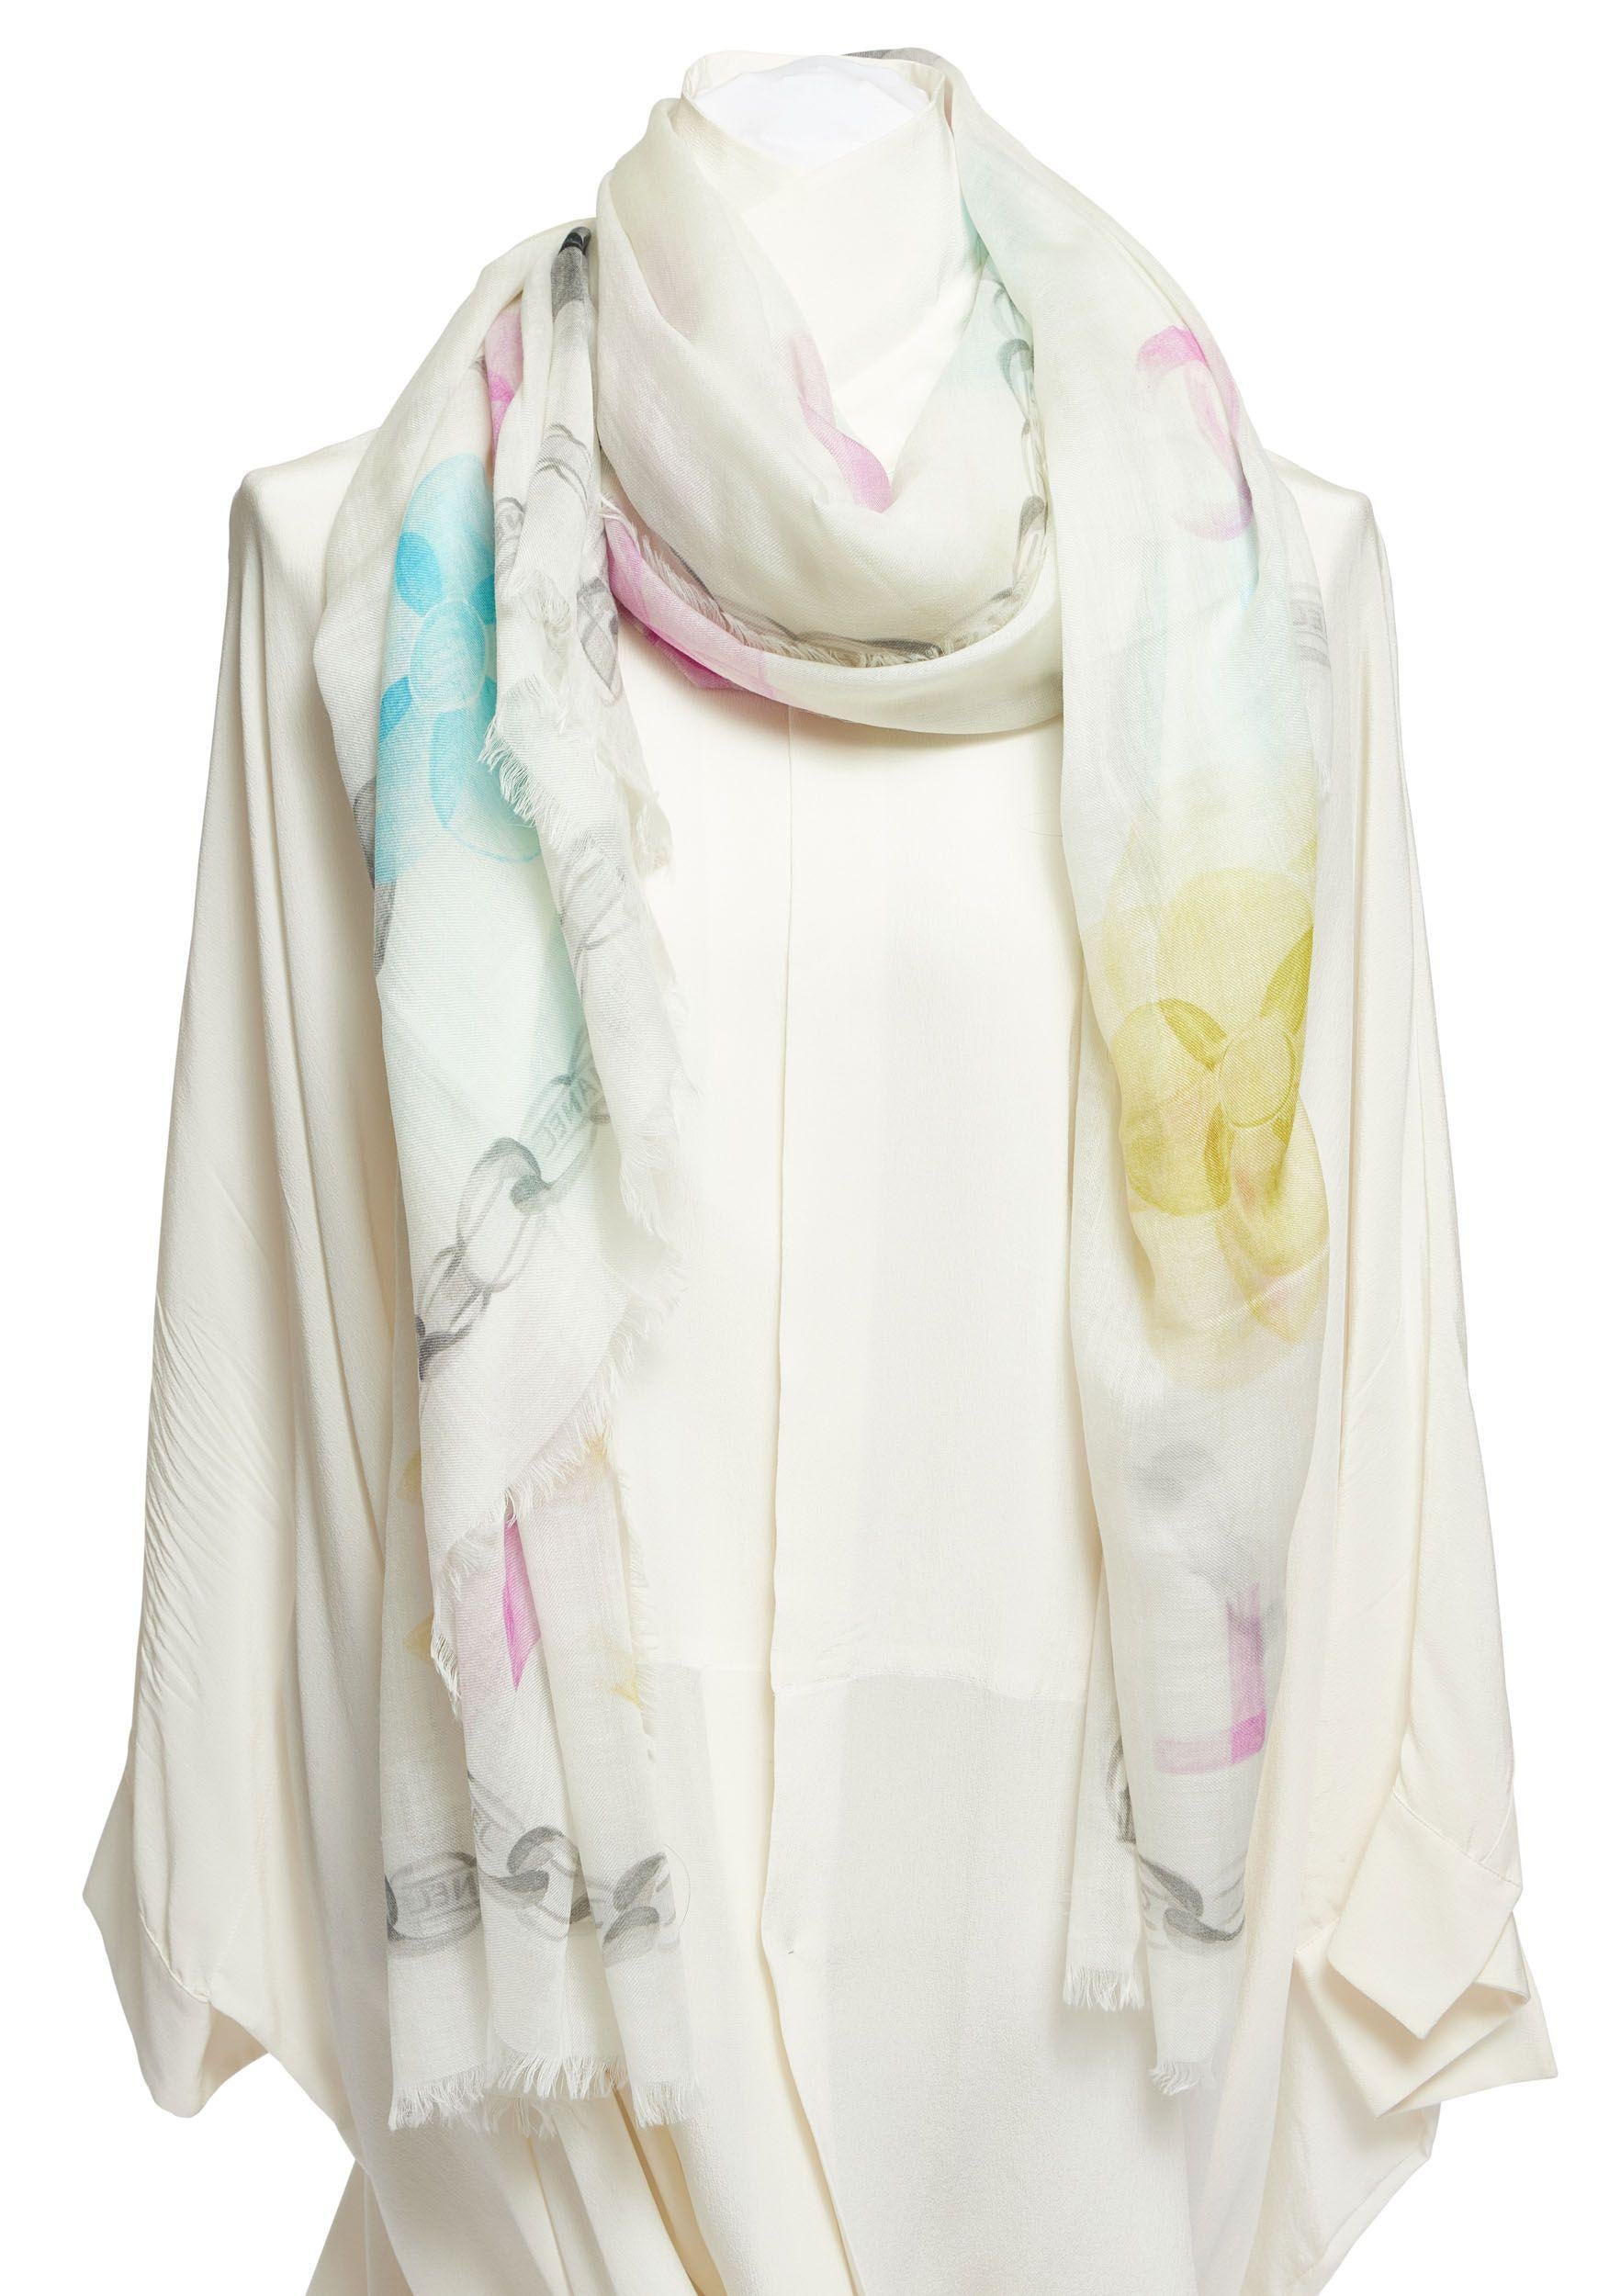 Chanel white cashmere white shawl with multicolor camellias on it and a black trim out of flowers and CC logos. The edges of the scarf are fringed. It's a big piece which can be worn as a cape or just as scarf since it's so light and soft. It is